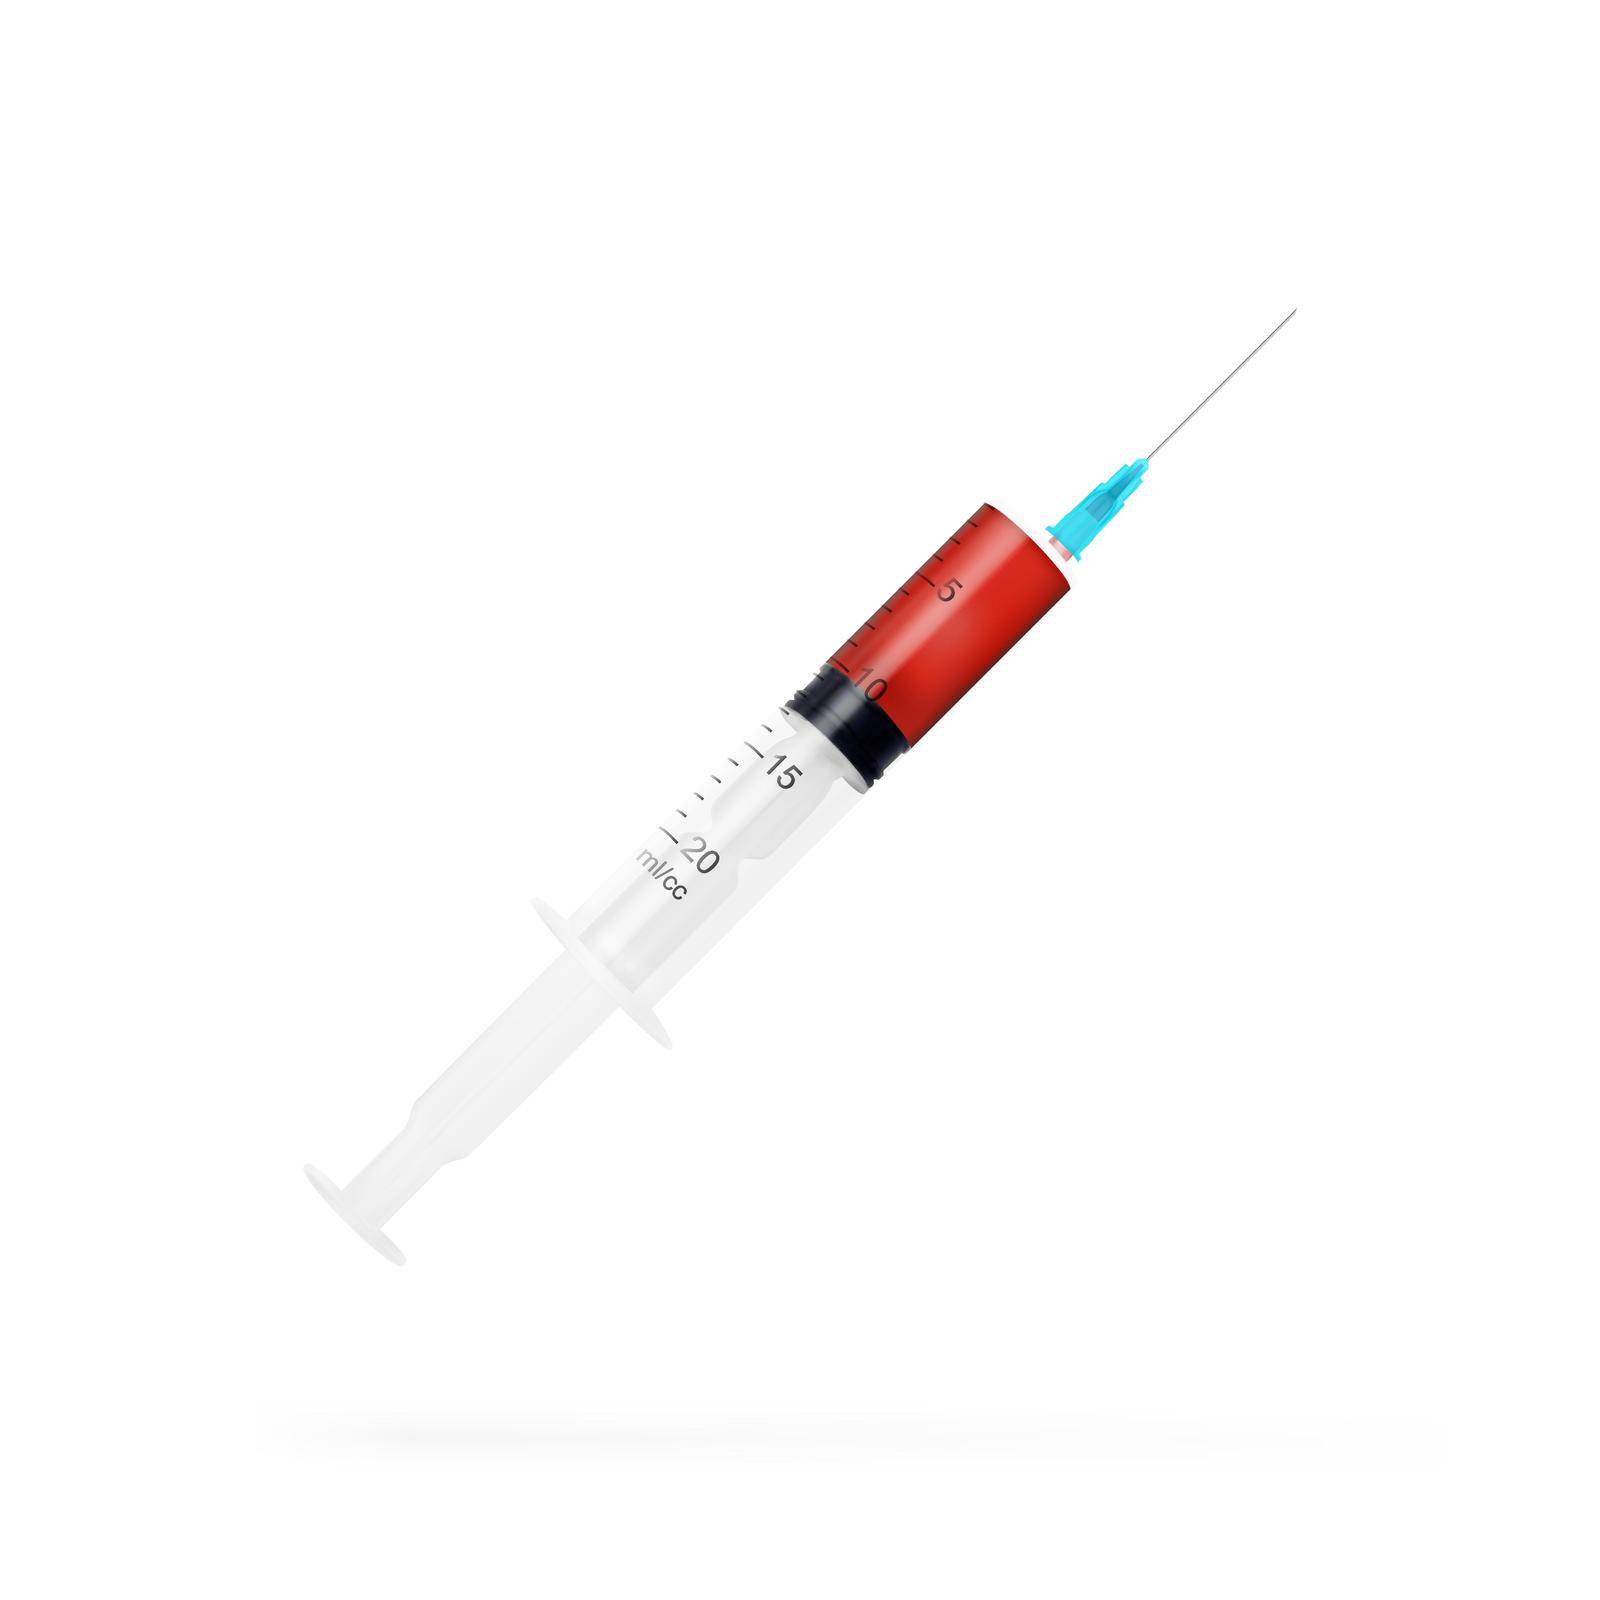 Realistic Syringe With Blood Isolated On White Background by VectorThings